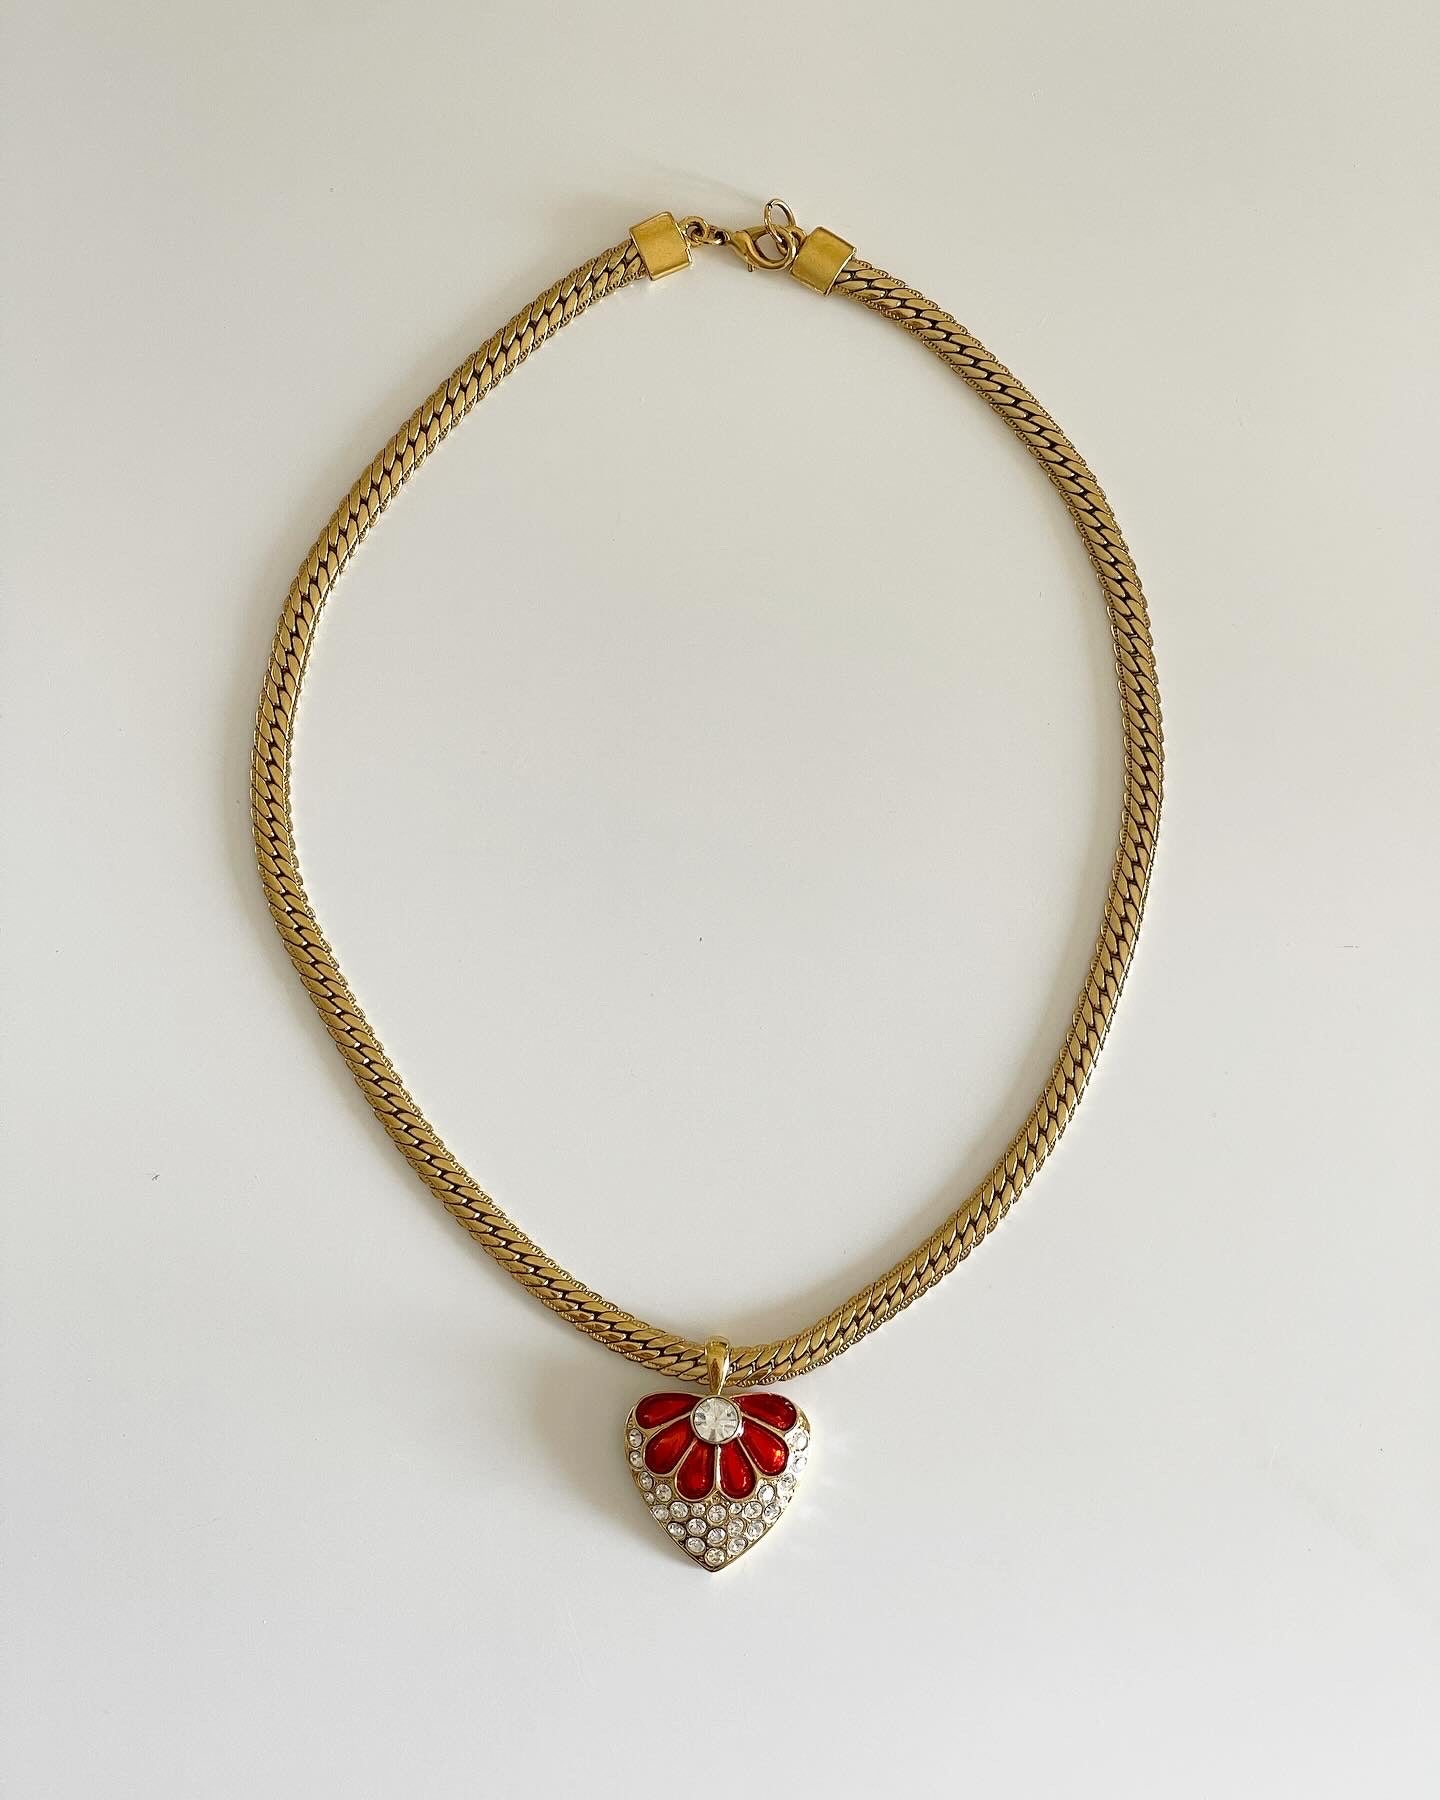 Gorgeous vintage necklace with strawberry-like design pendant